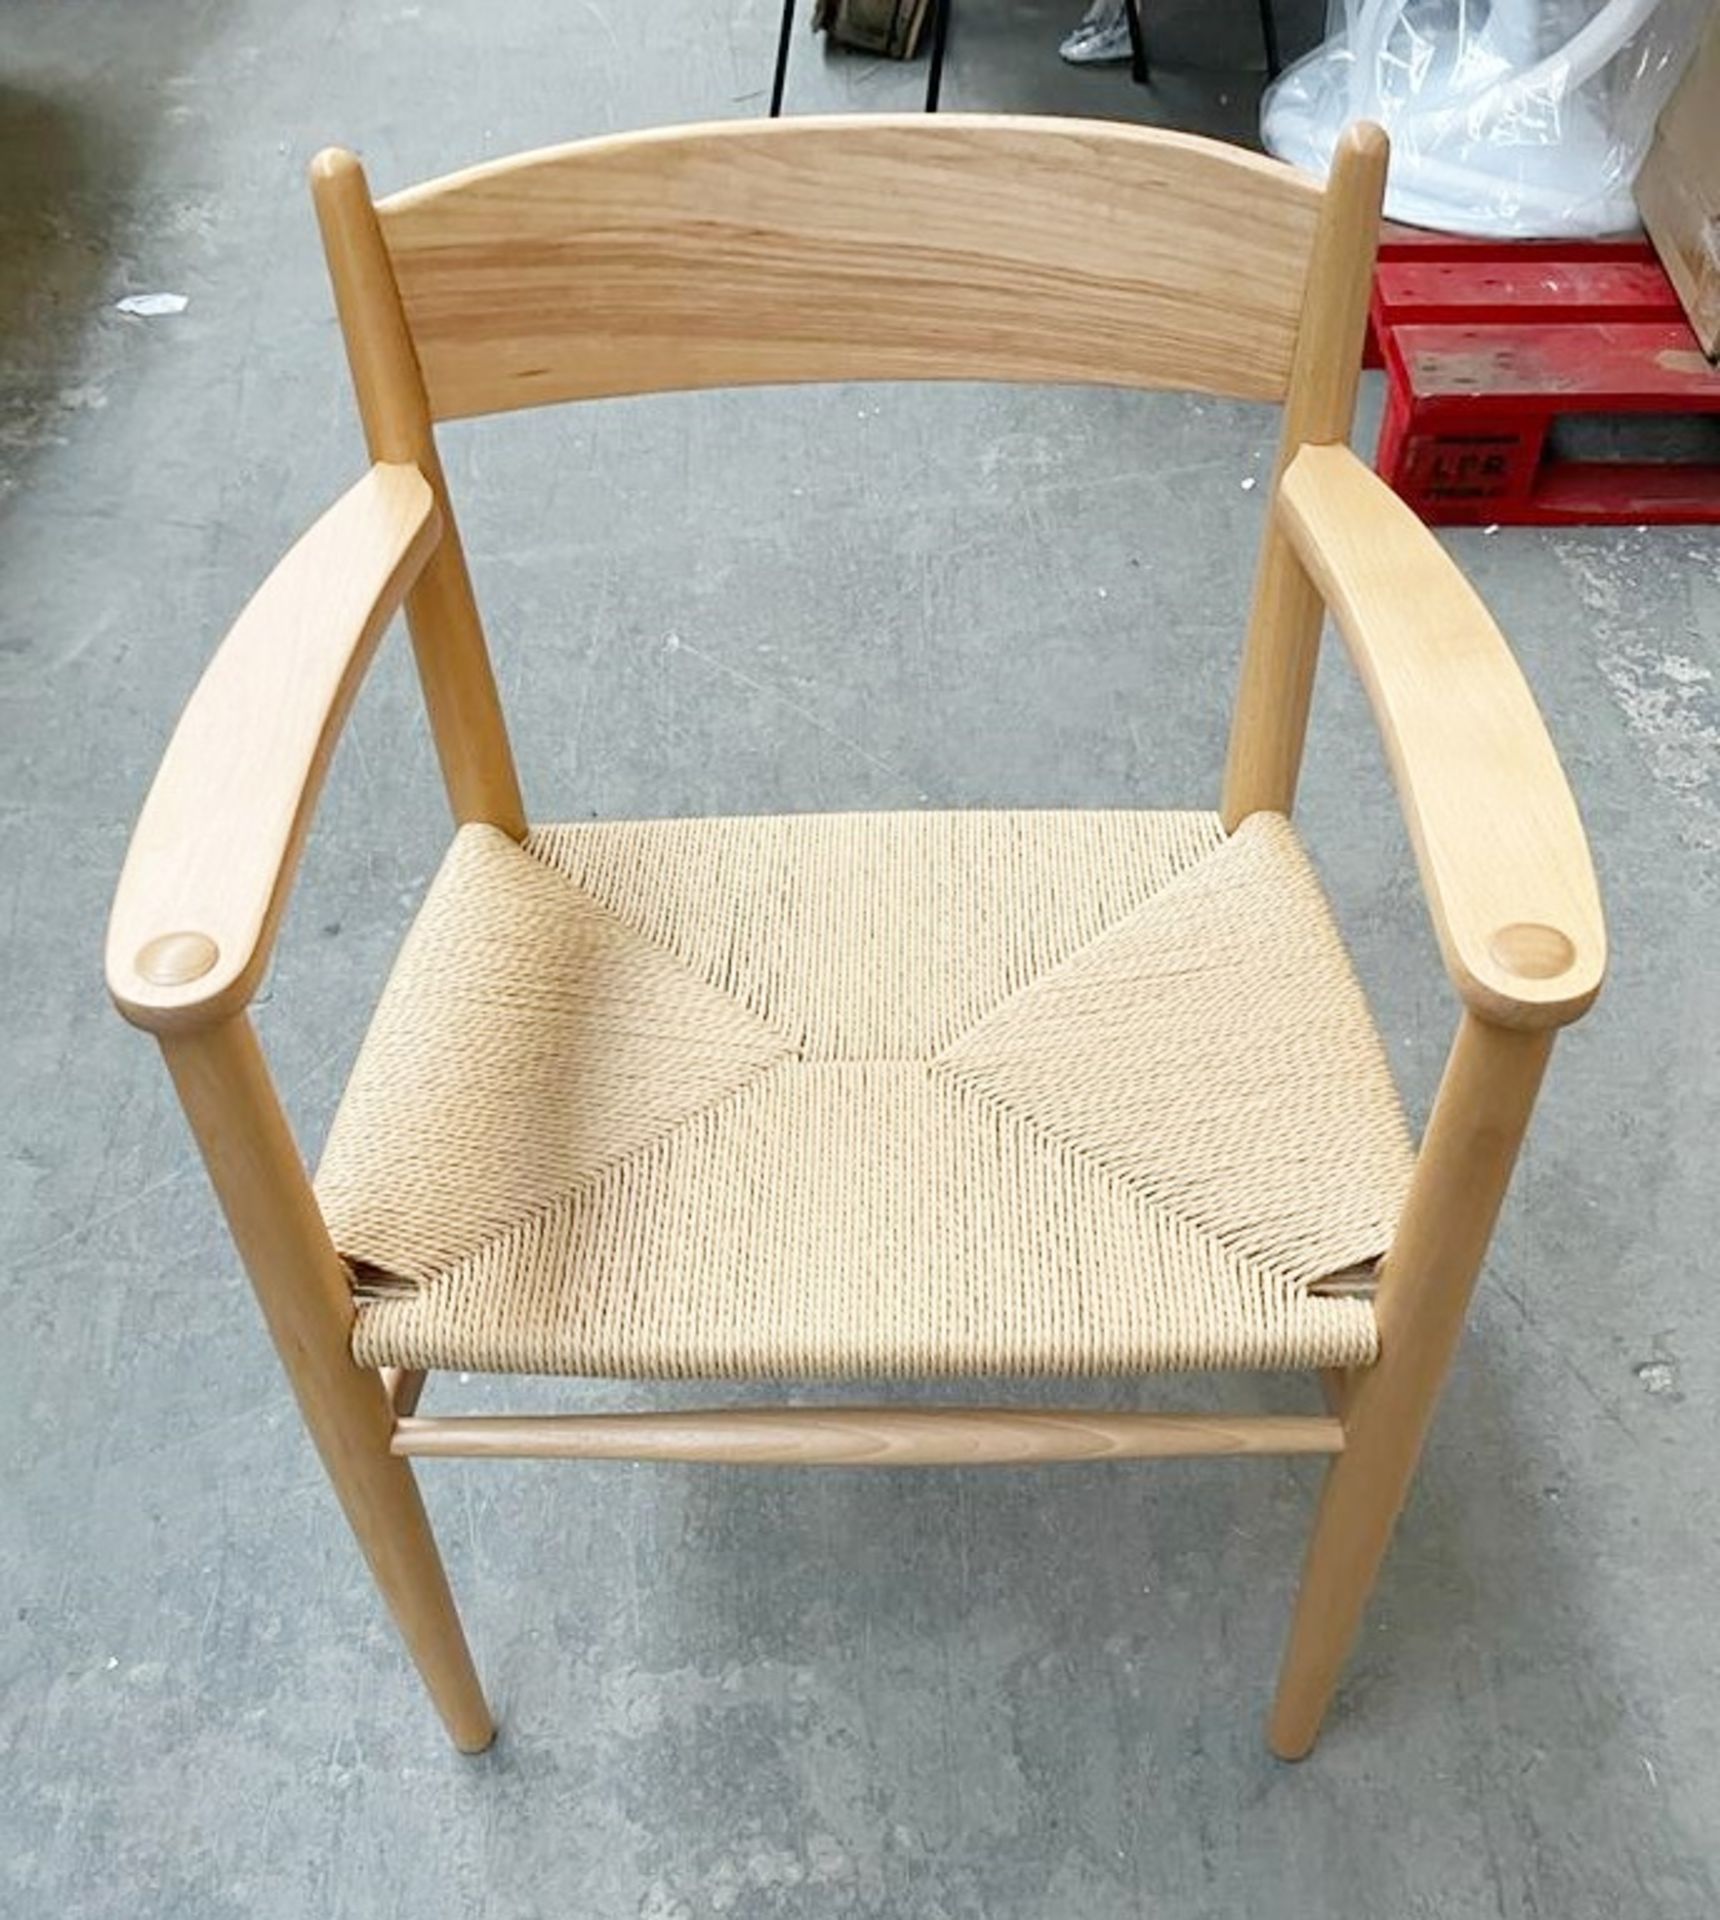 2 x Nielsen Natural + Natural Cord Chair With Arm Rests - Dimensions: 50(h) x 48(d) x 58(w) cm - - Image 3 of 7